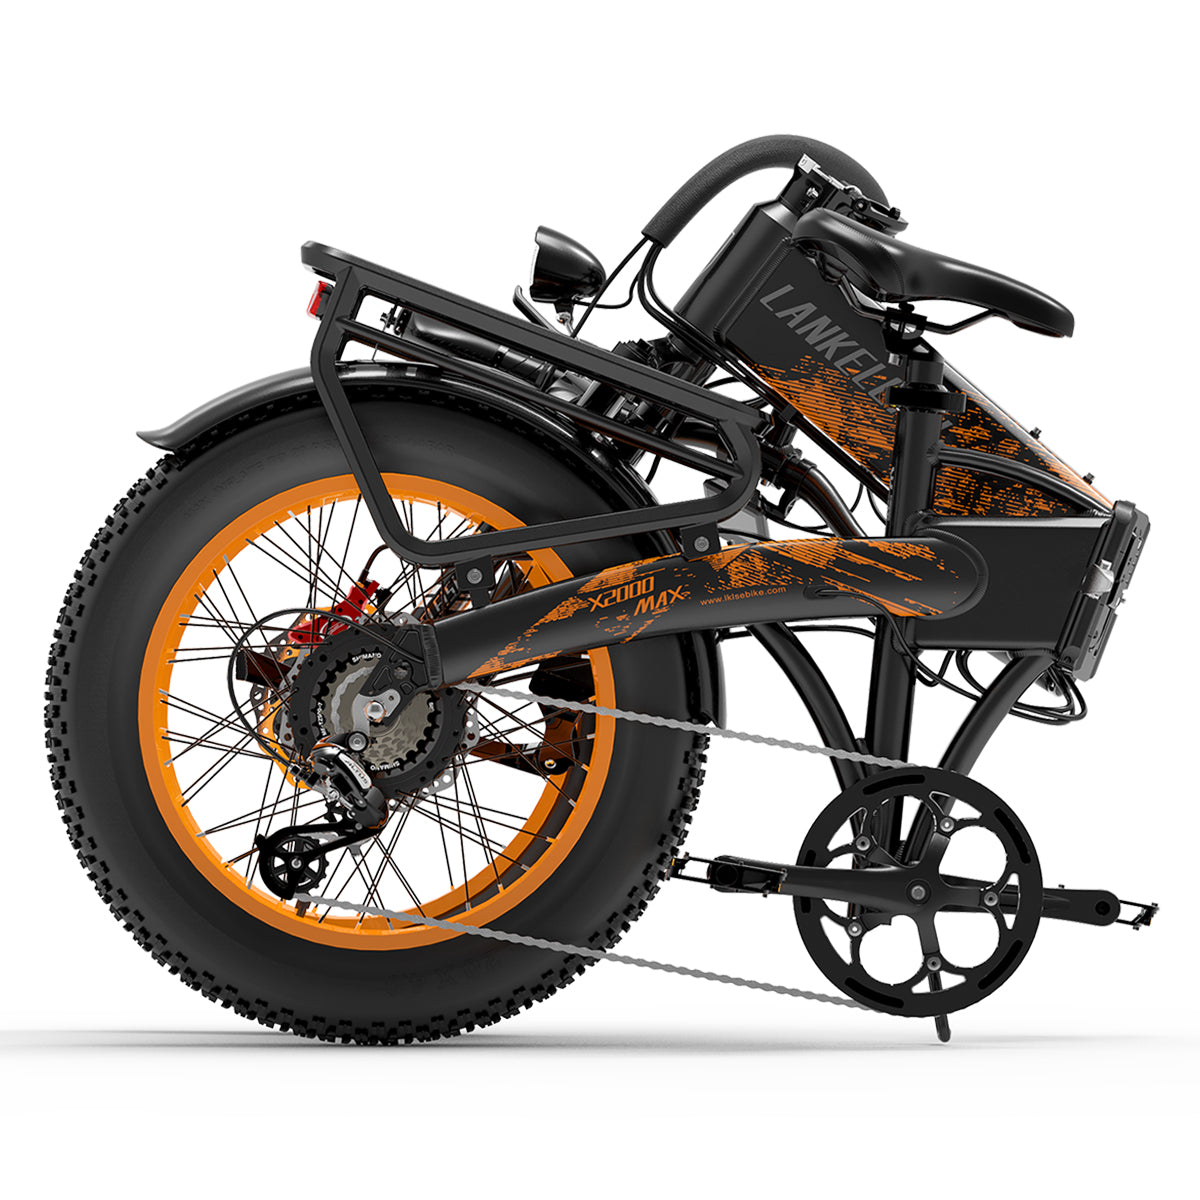 LANKELEISI X2000 MAX 2000W Dual Motor Foldable Electric Mountain Bike(New Arrivals)